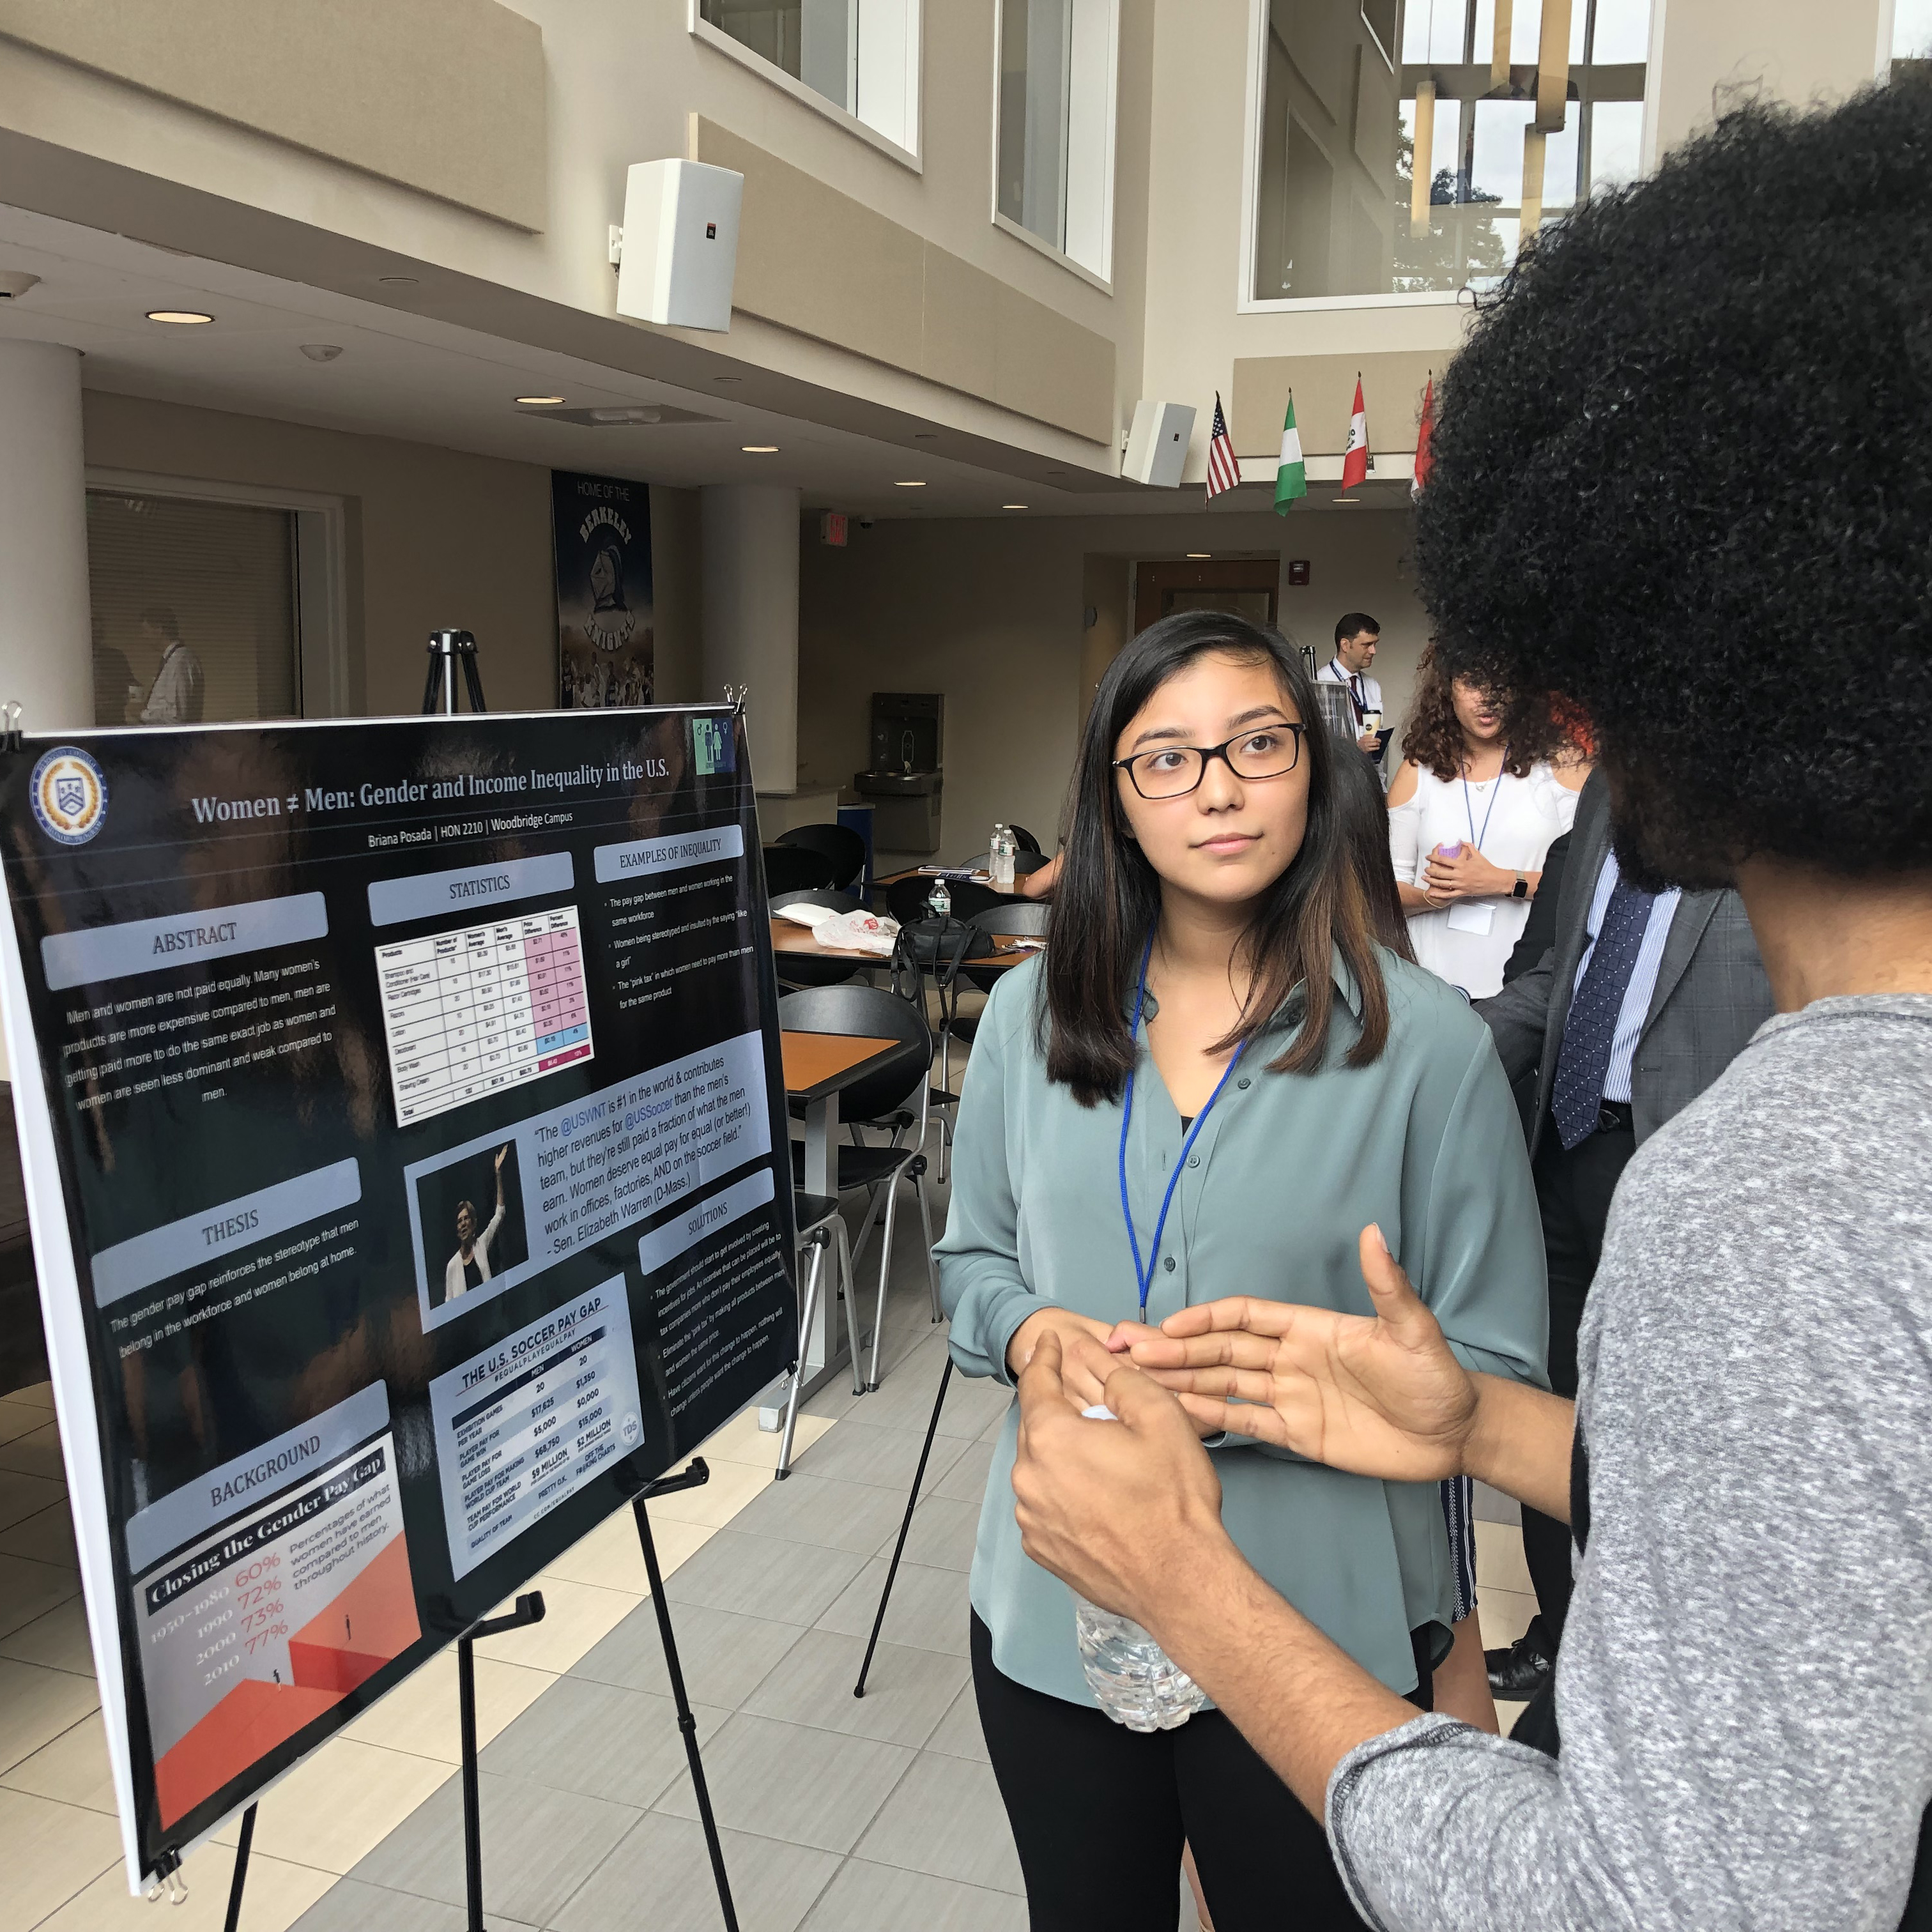 An Honors scholar speaks about her poster